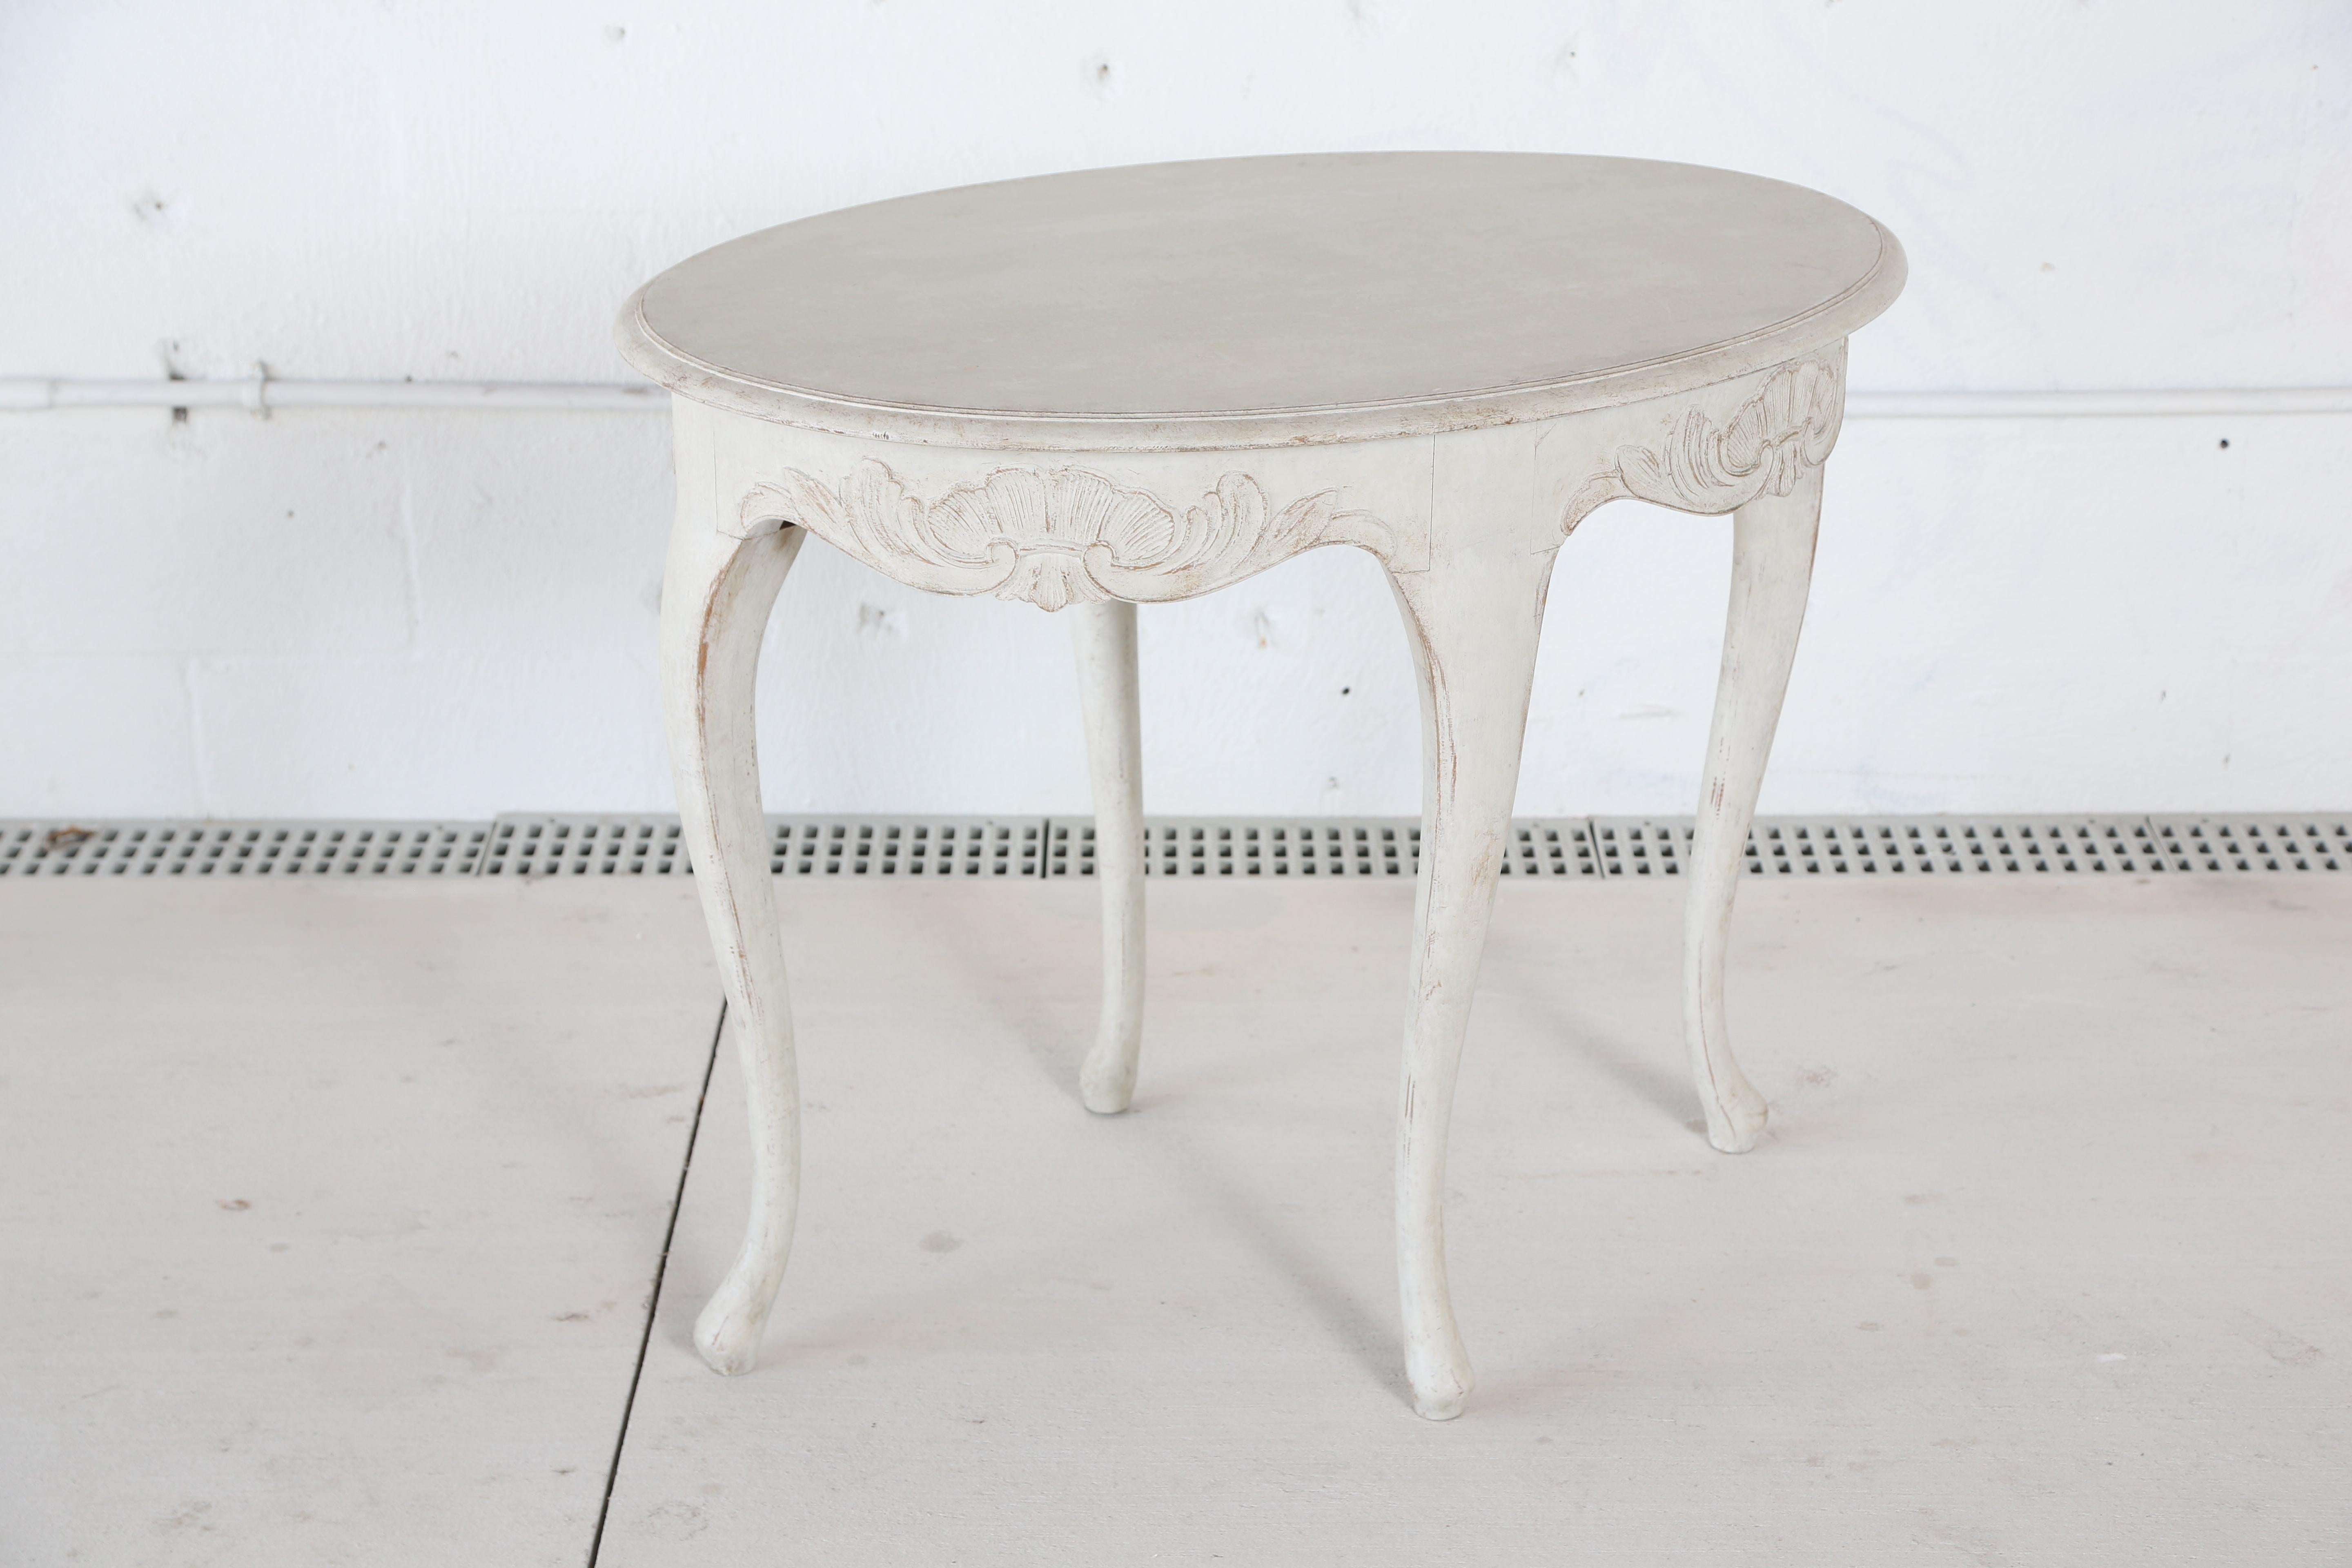 Antique Swedish Rococo style painted oval table, painted in Swedish white finish. Lovely scalloped
carved apron with shells and leaves, cabriole legs.

Measures: H 29.50